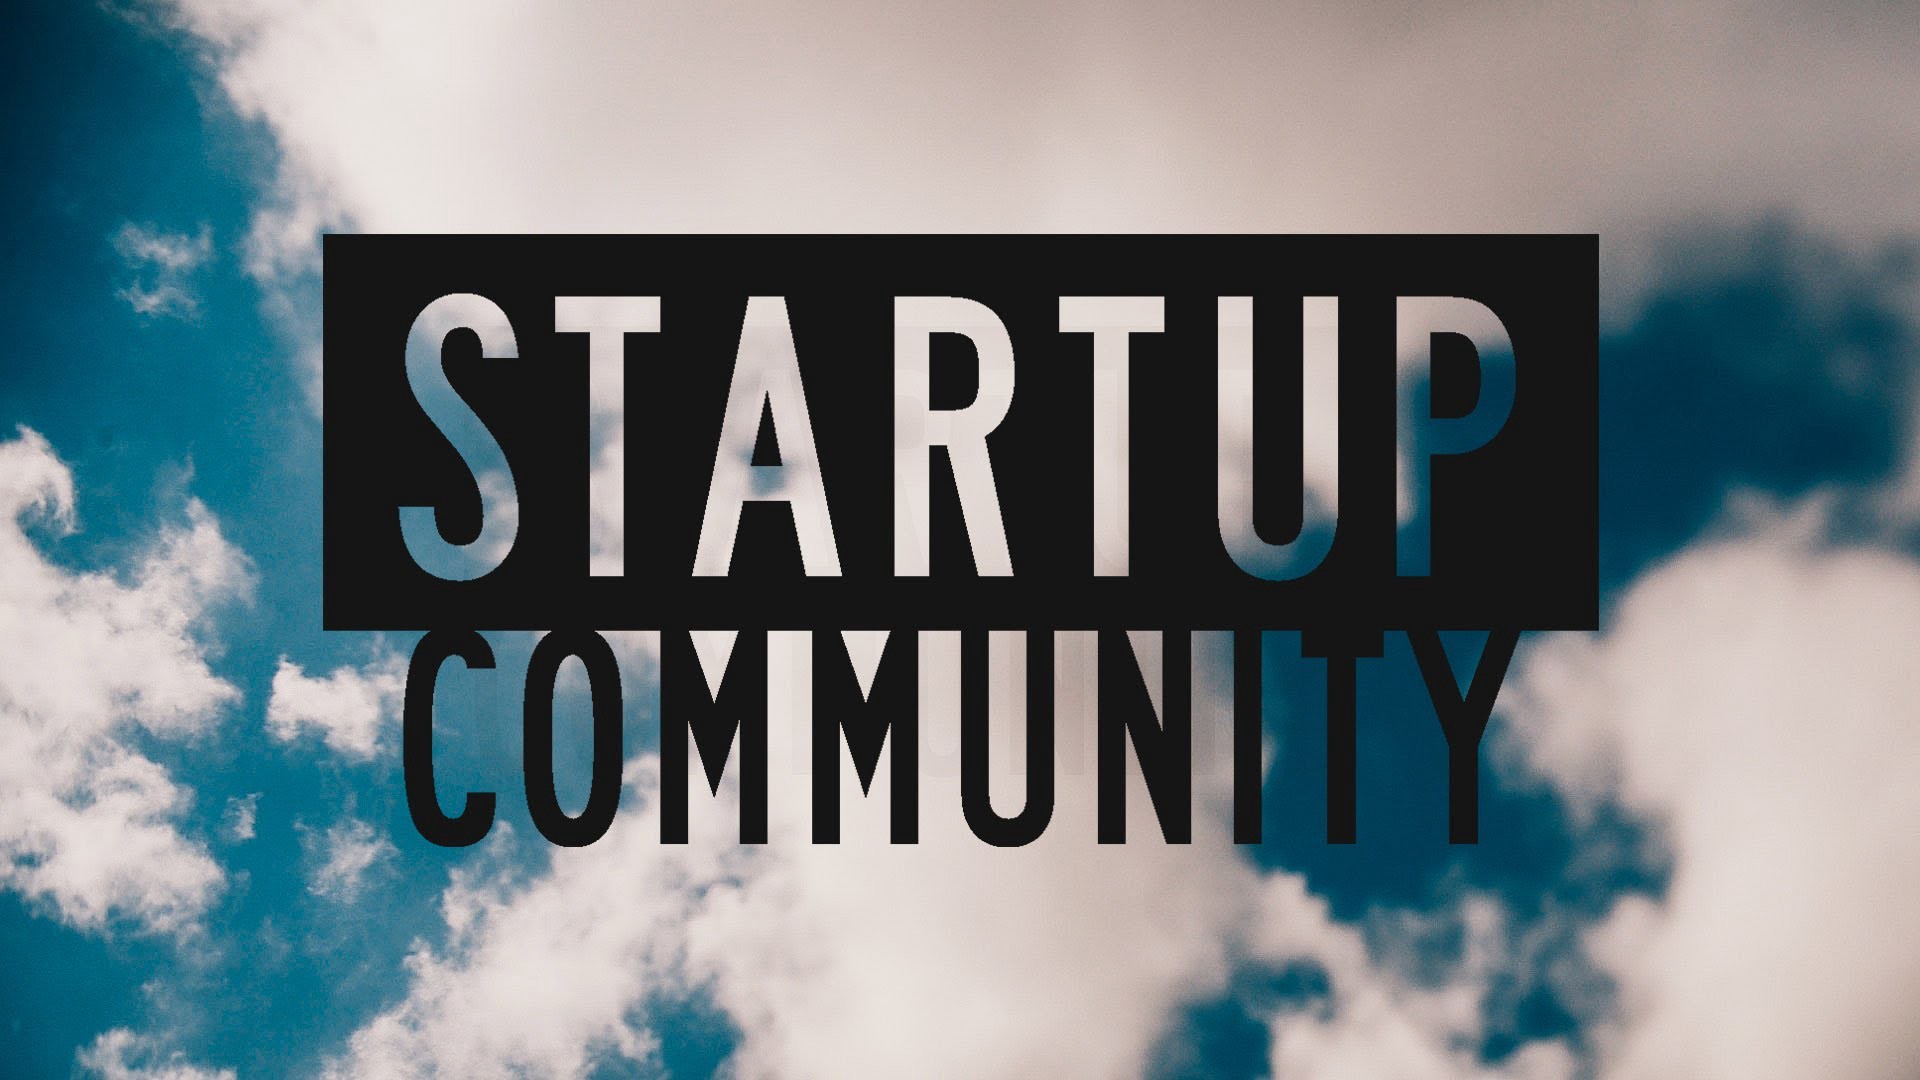 How Startup Communities Could Help Students Become Entrepreneurs